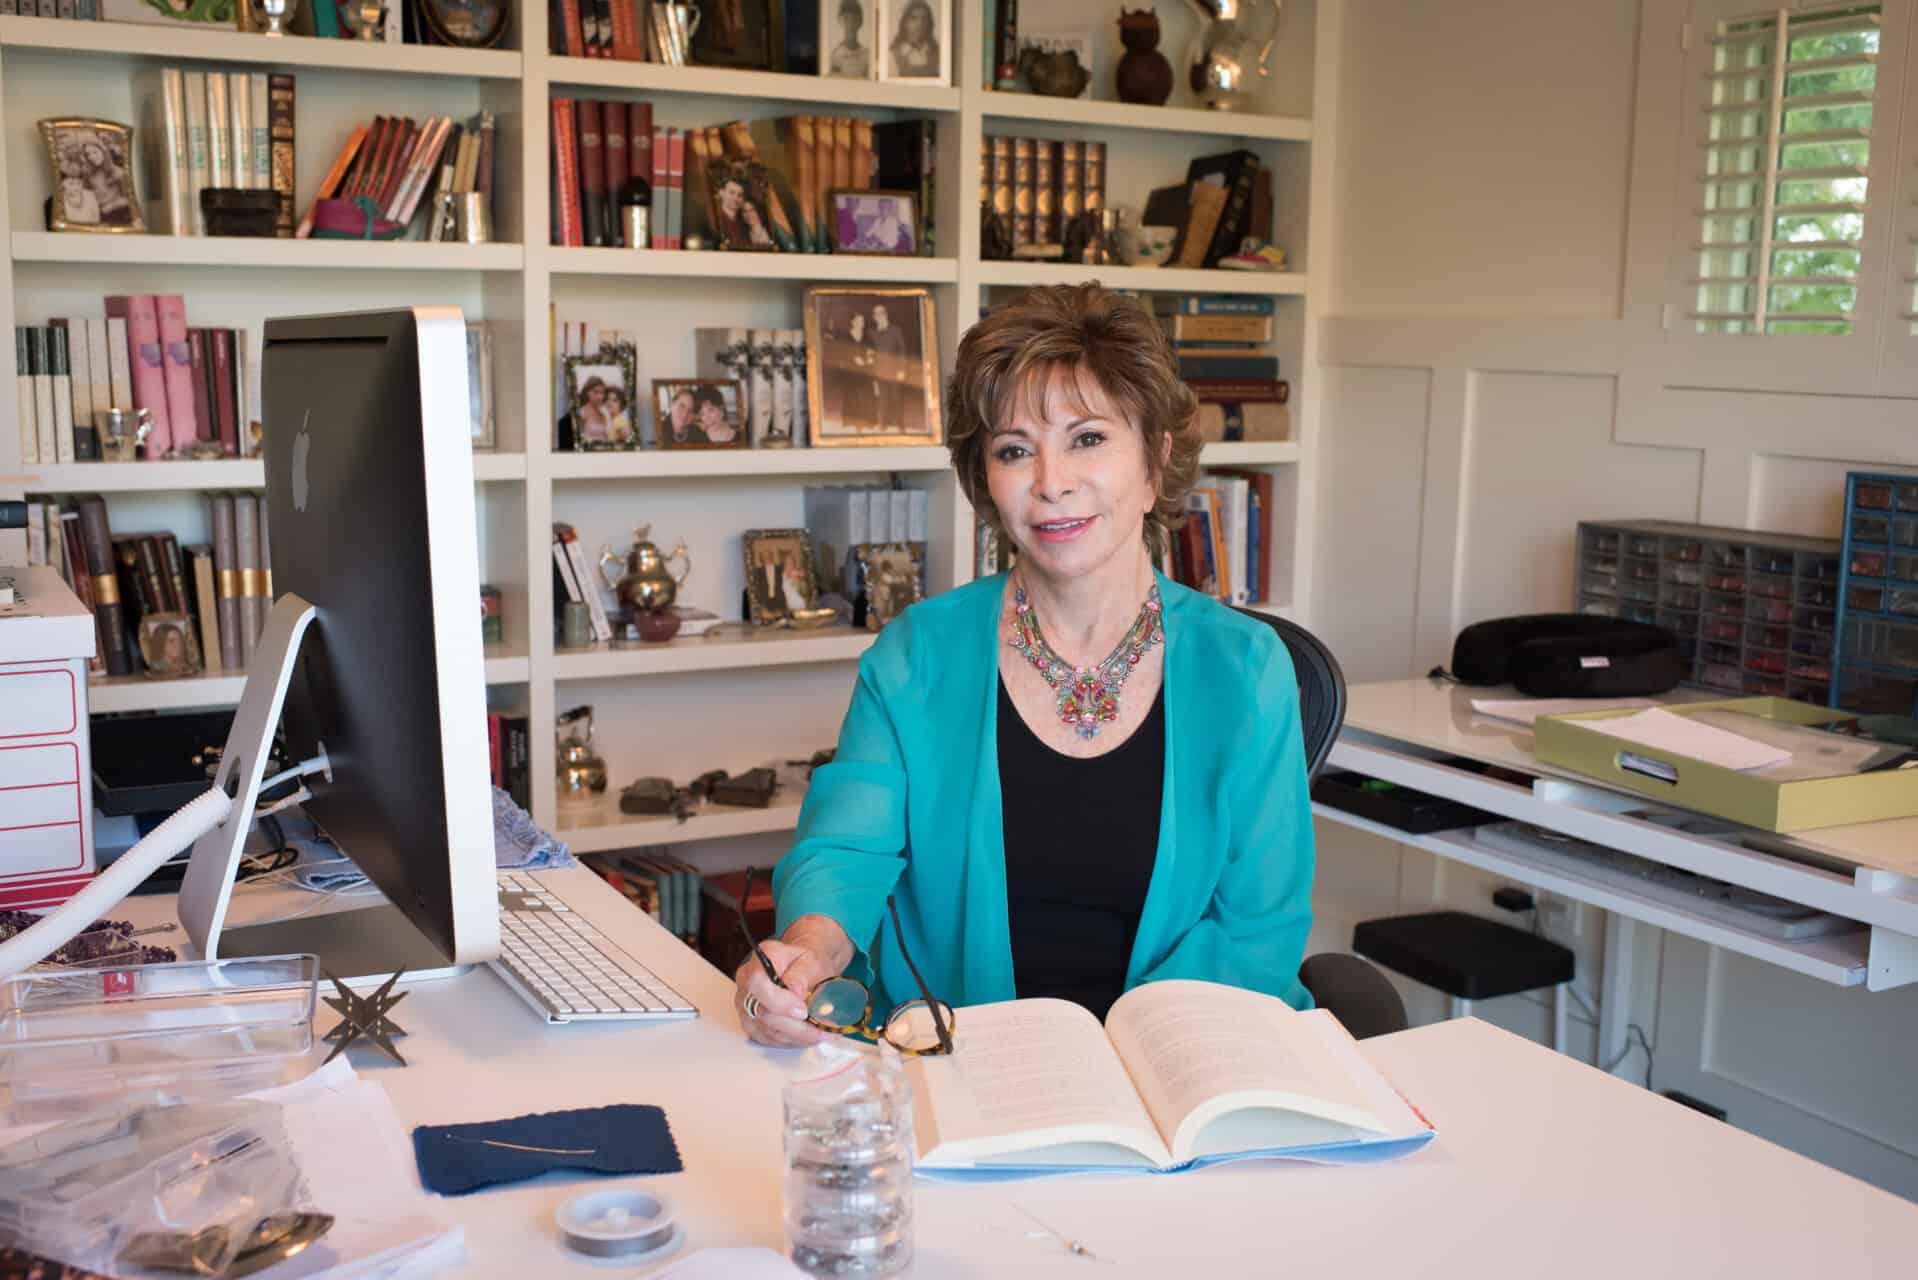 Isabel Allende is a successful author